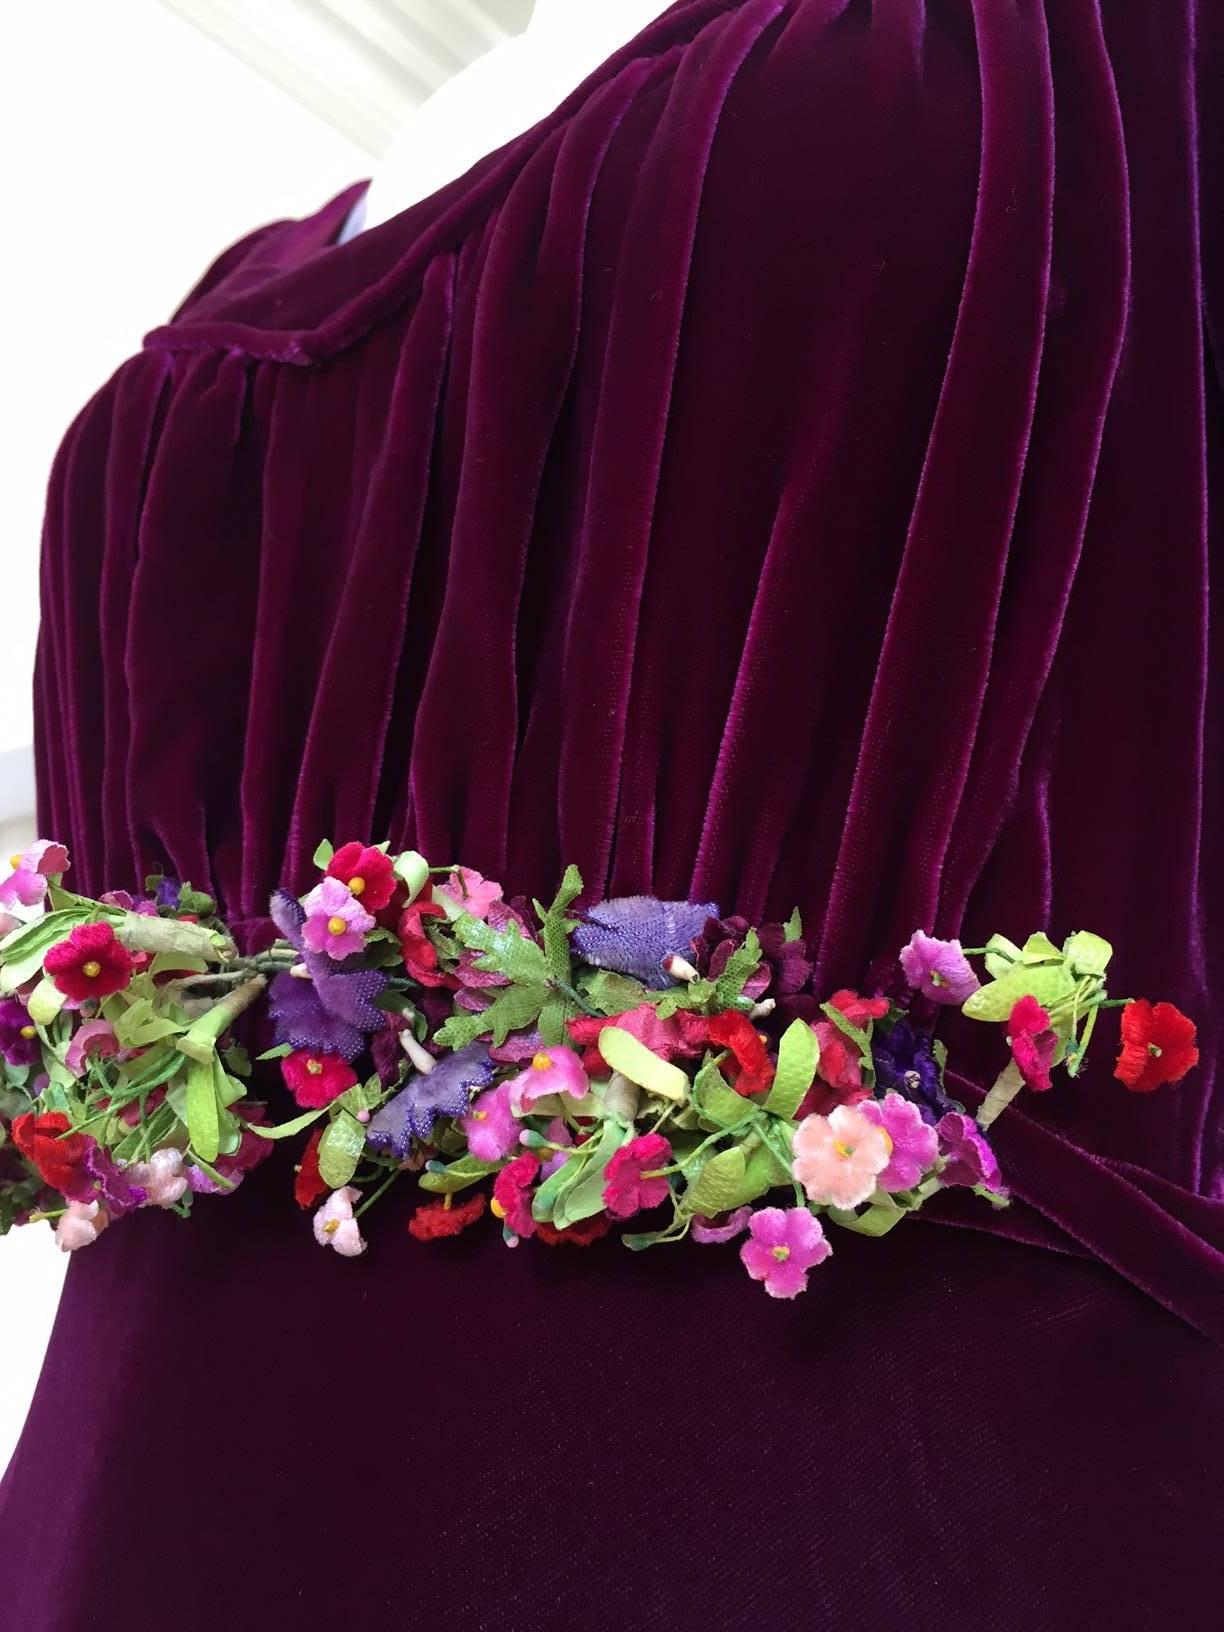 1930s Maroon silk velvet gown with floral applique.
Bust: 34